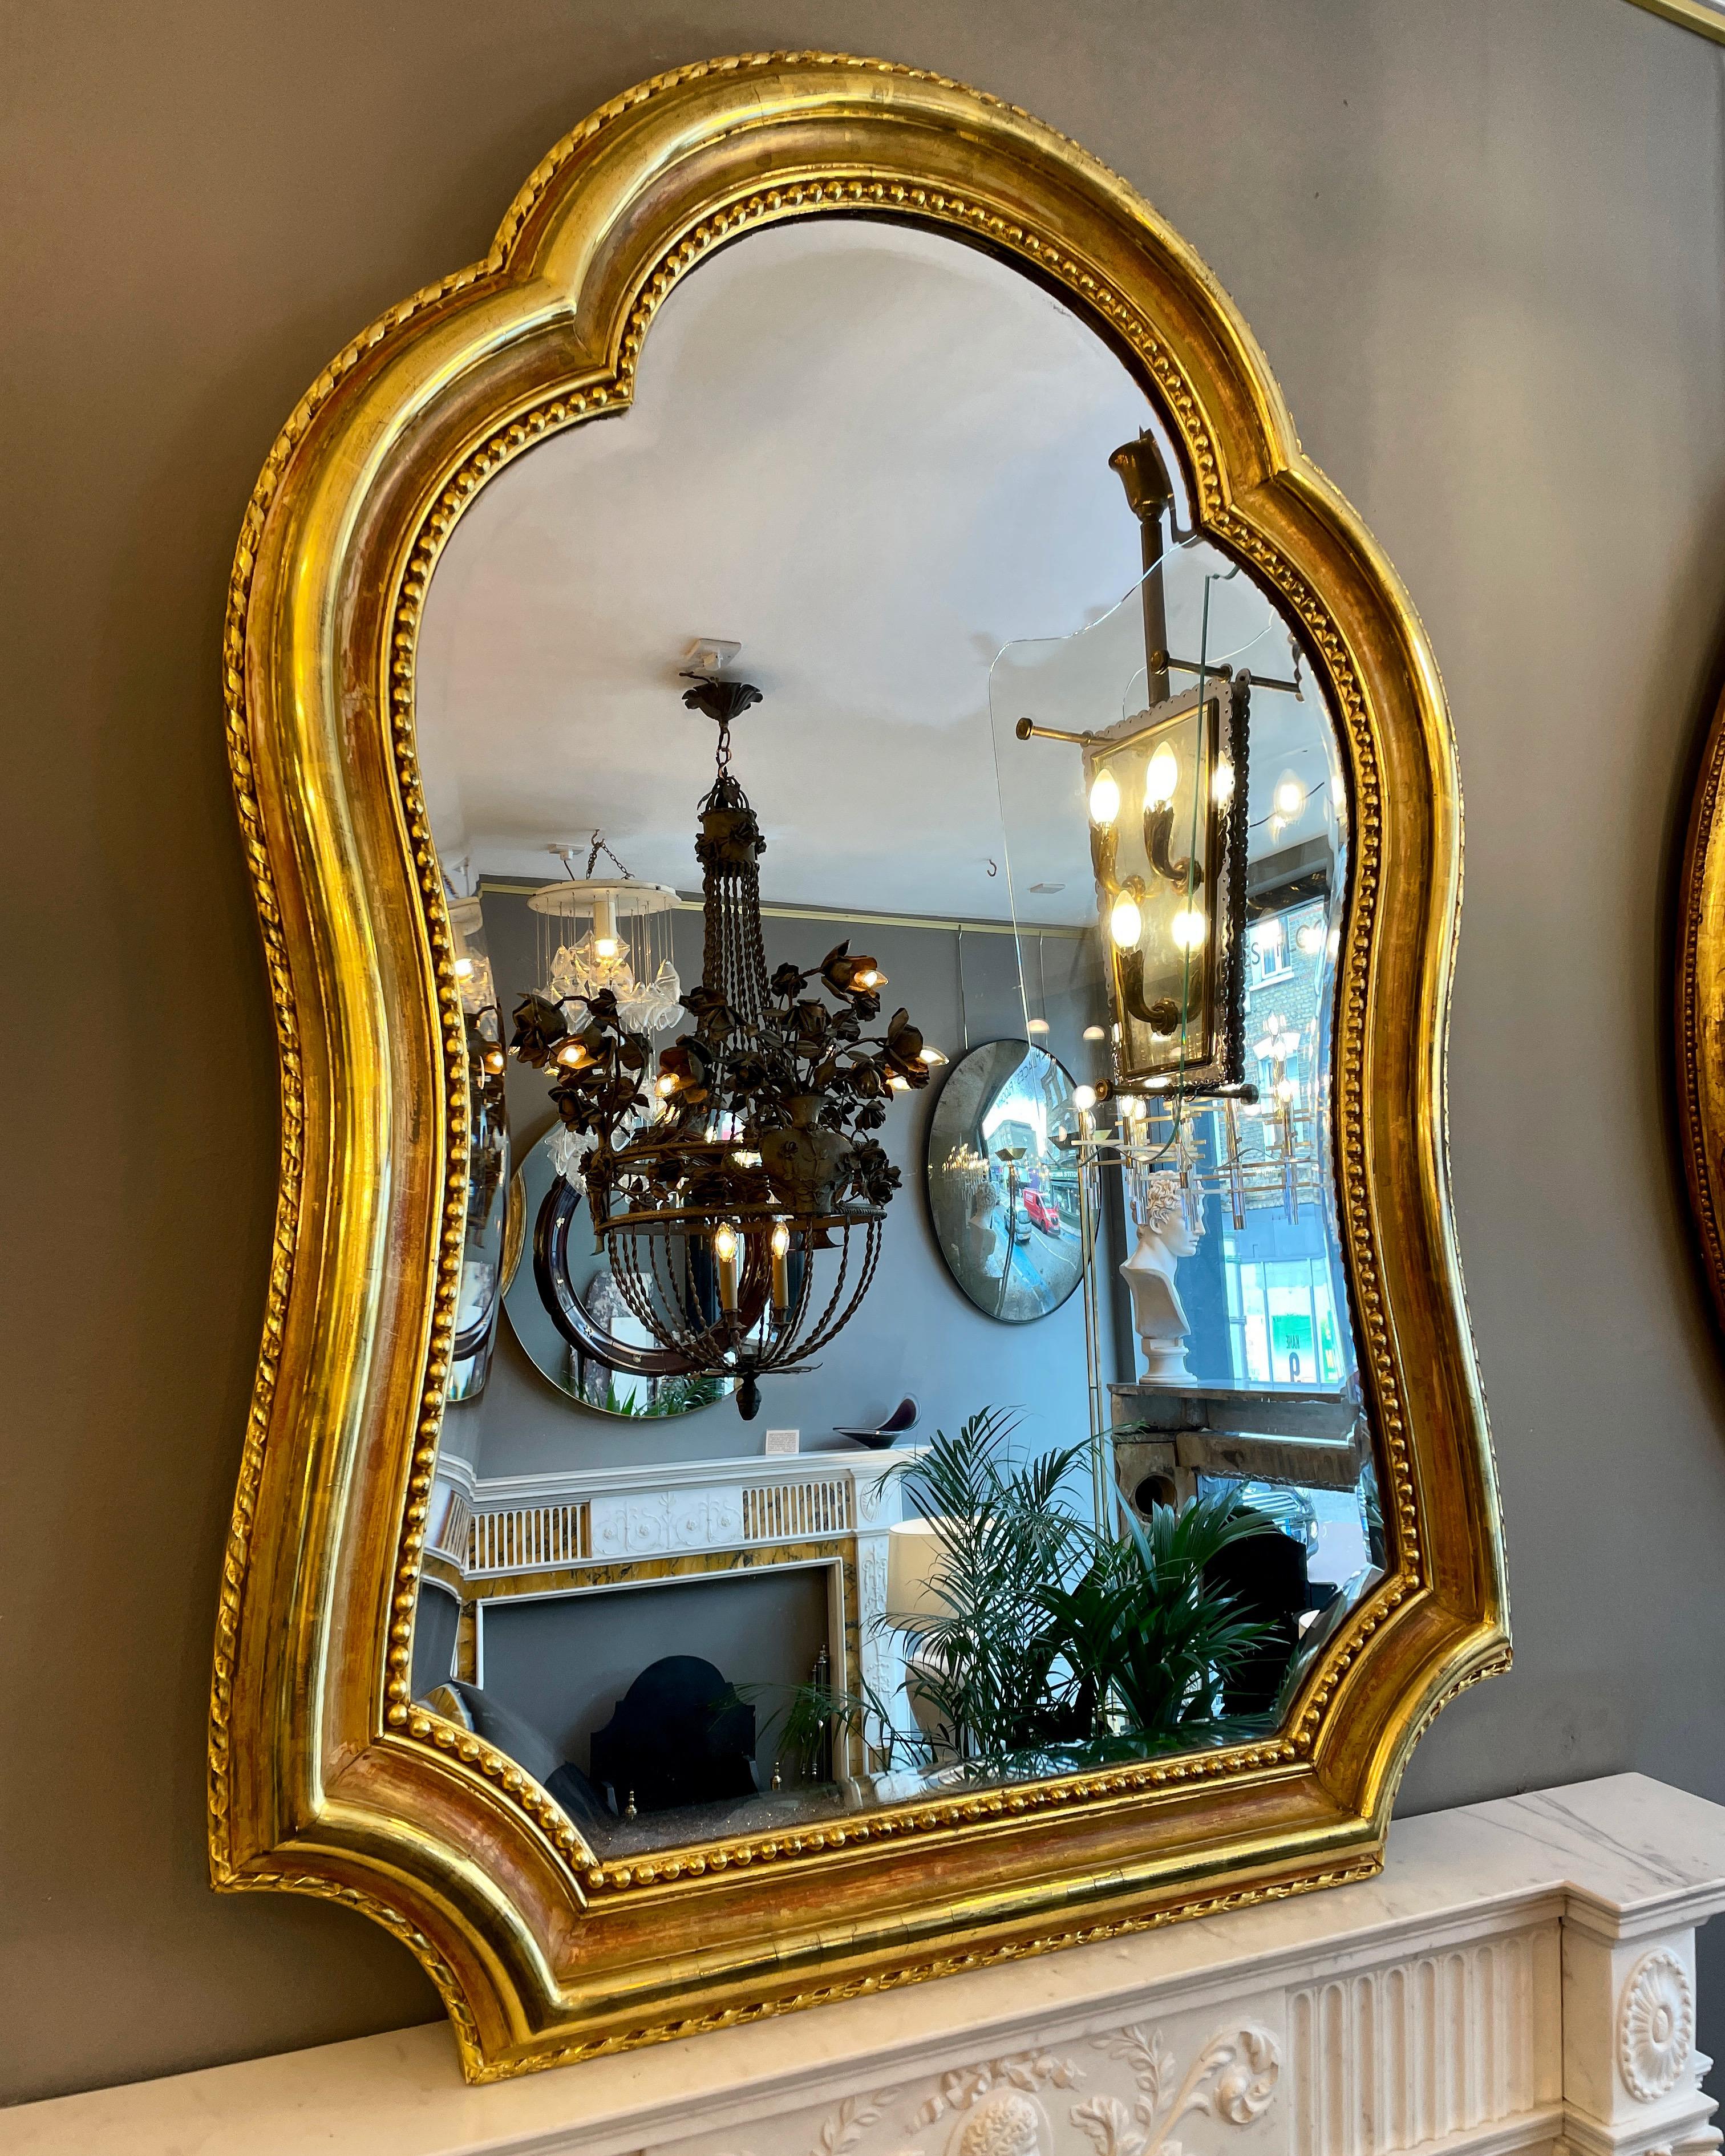 An unusual gilt French mirror with quality gilt work, rich in colour and in very good condition. Original bevelled plate. The frame with a wide moulding, outer edge with ribbon detail and inner beaded mirror border. A quality piece. Mid to late 19th